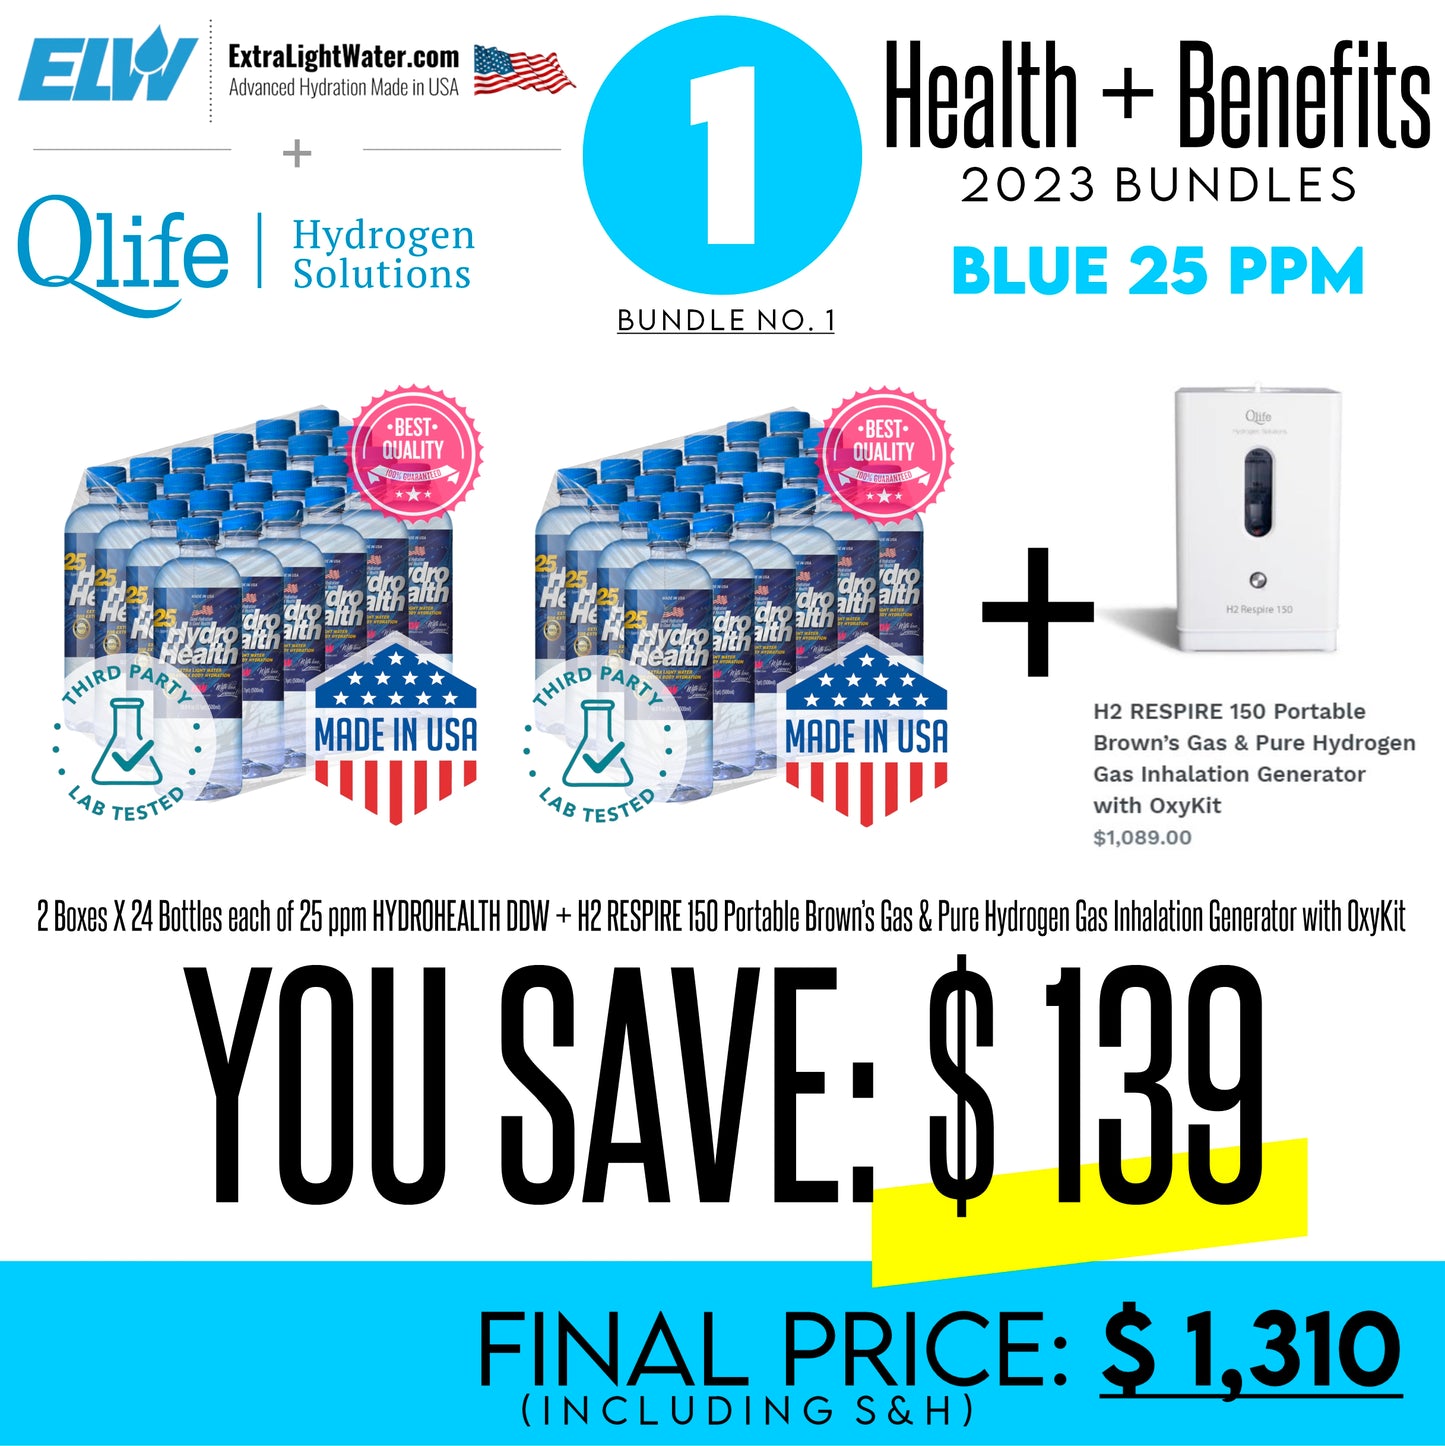 ELW-H2RESP-BUNDLE-25 (2 boxes of 25 ppm and 1 x H2 RESPIRE 150 Portable Brown’s Gas & Pure Hydrogen Gas Inhalation Generator OxyKit- $1310 only, you save $139. The price includes S&H